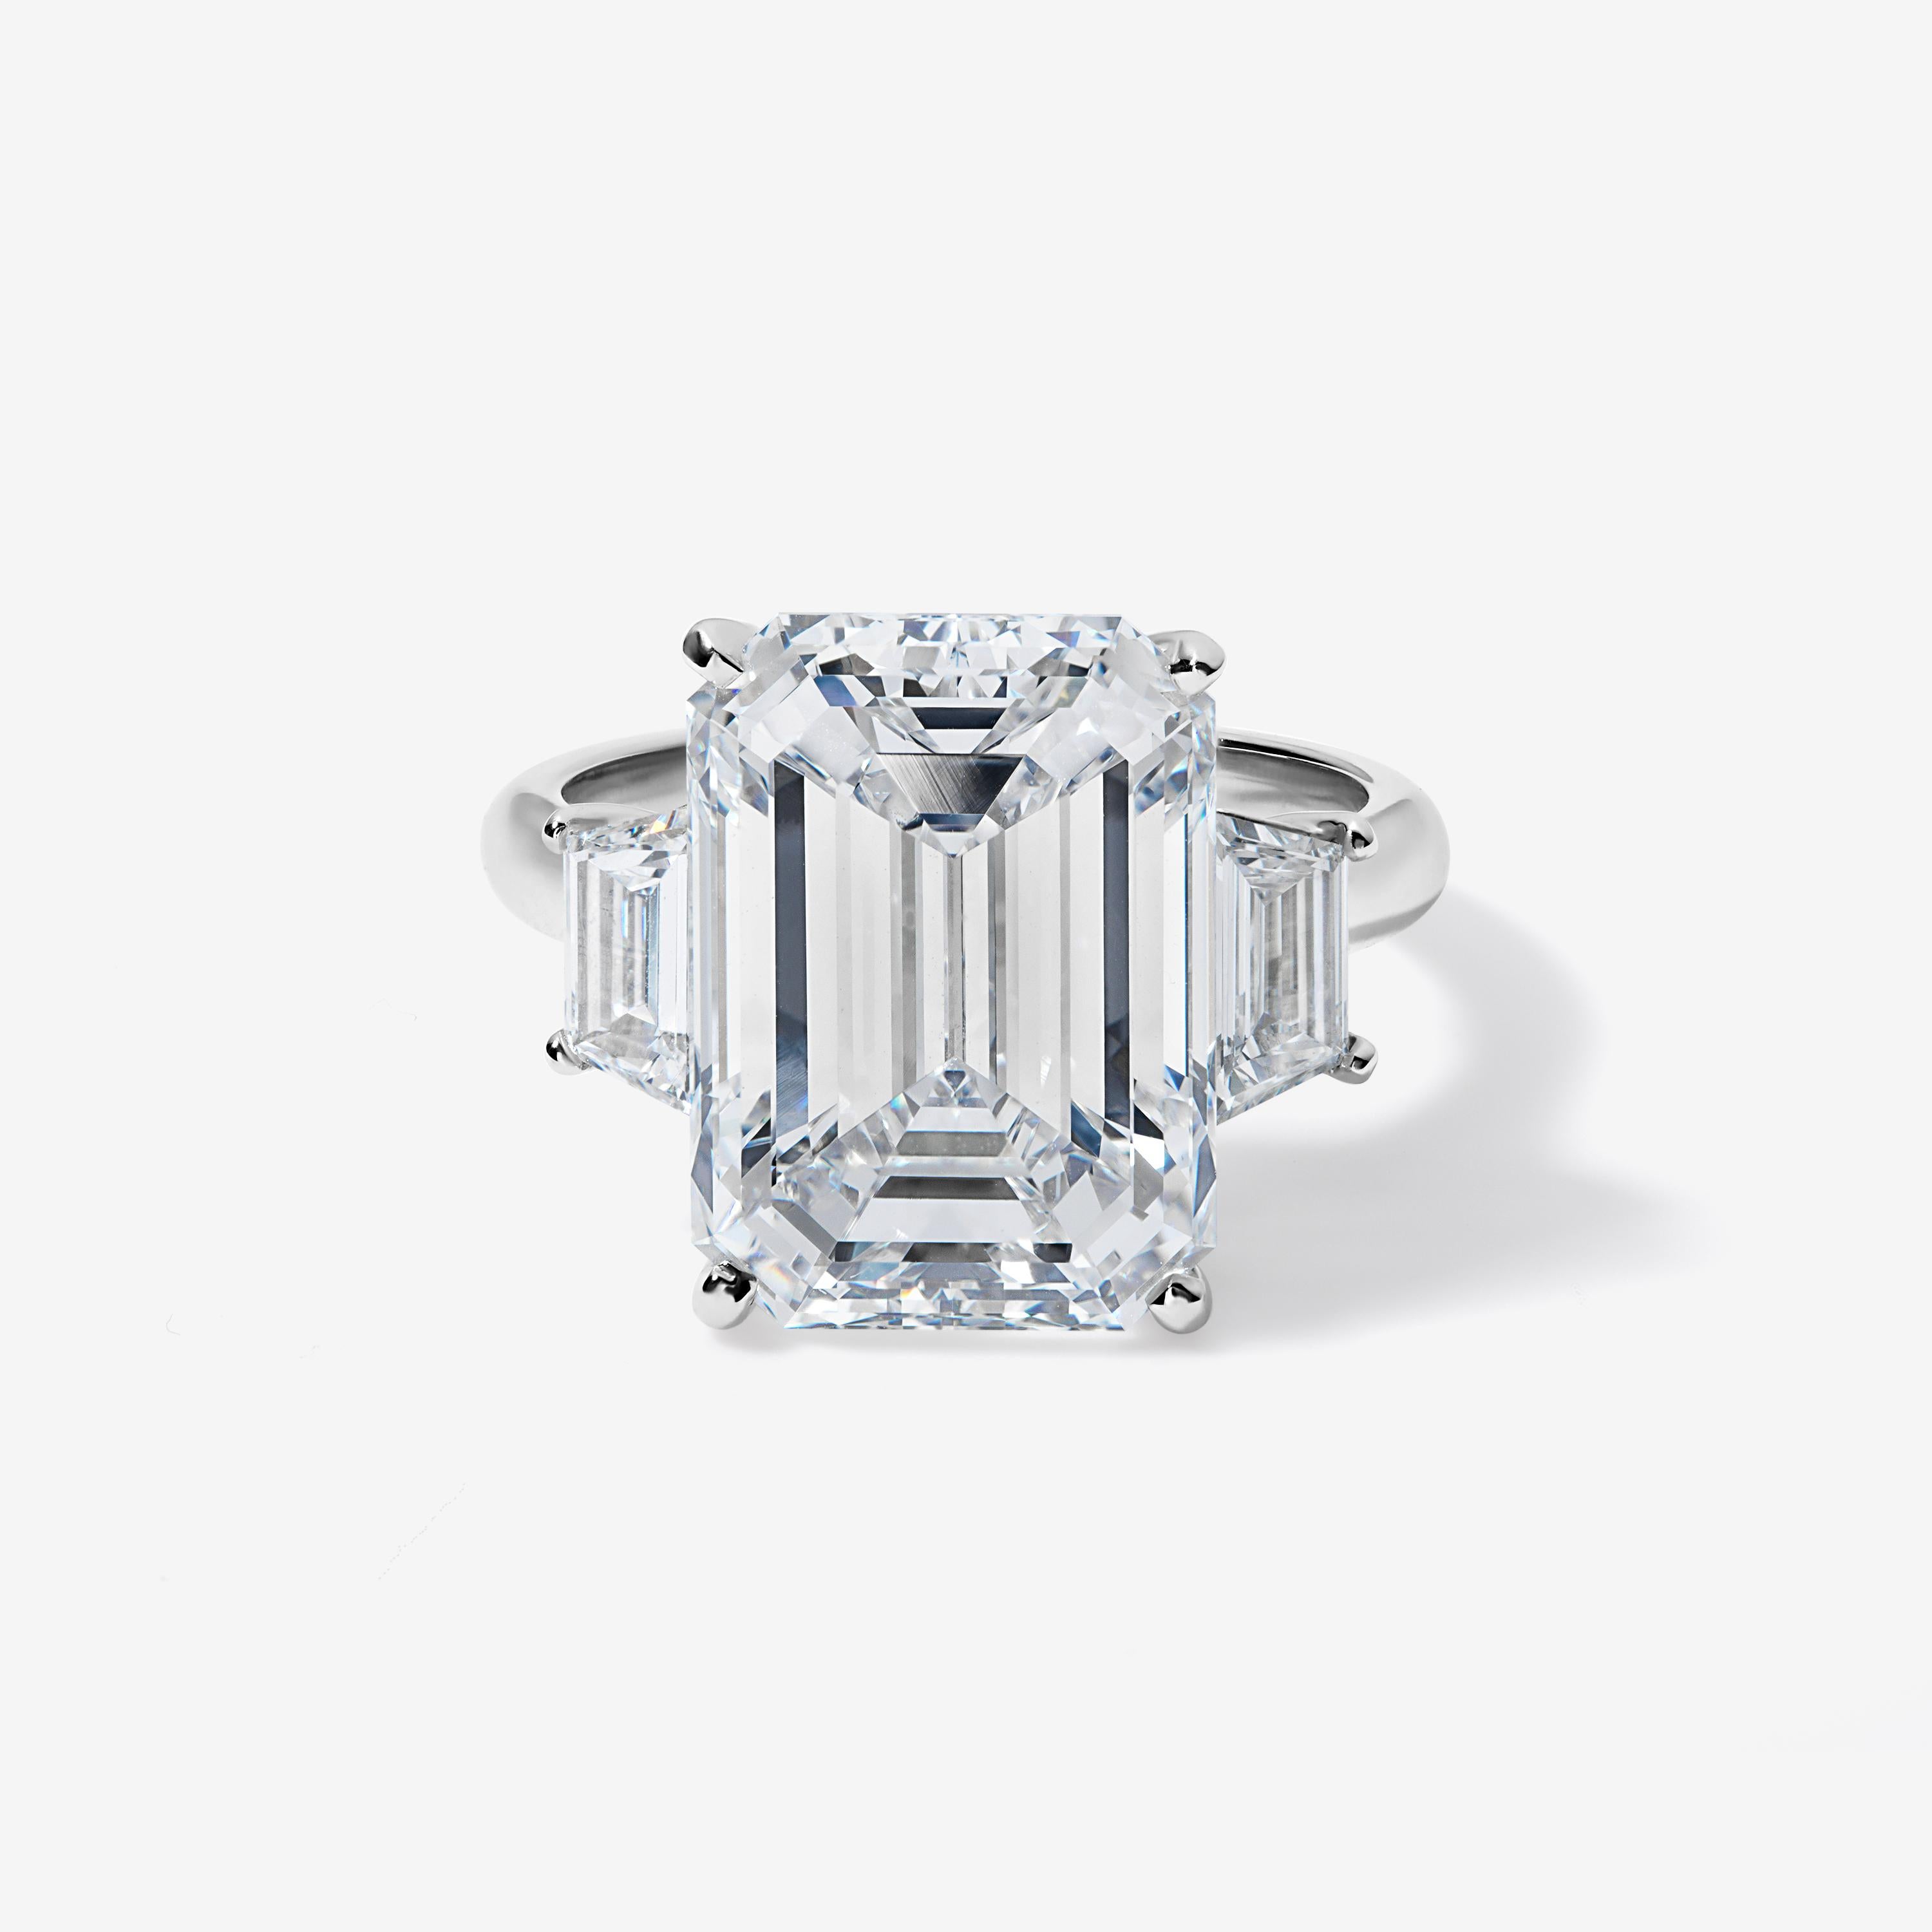 This platinum three stone ring is as classic as it gets.

The center 10 carat emerald cut diamond is colorless and eye clean, with an ideal 1.37 ratio and excellent polish and symmetry. It sits between two trapezoid cut diamonds, which are